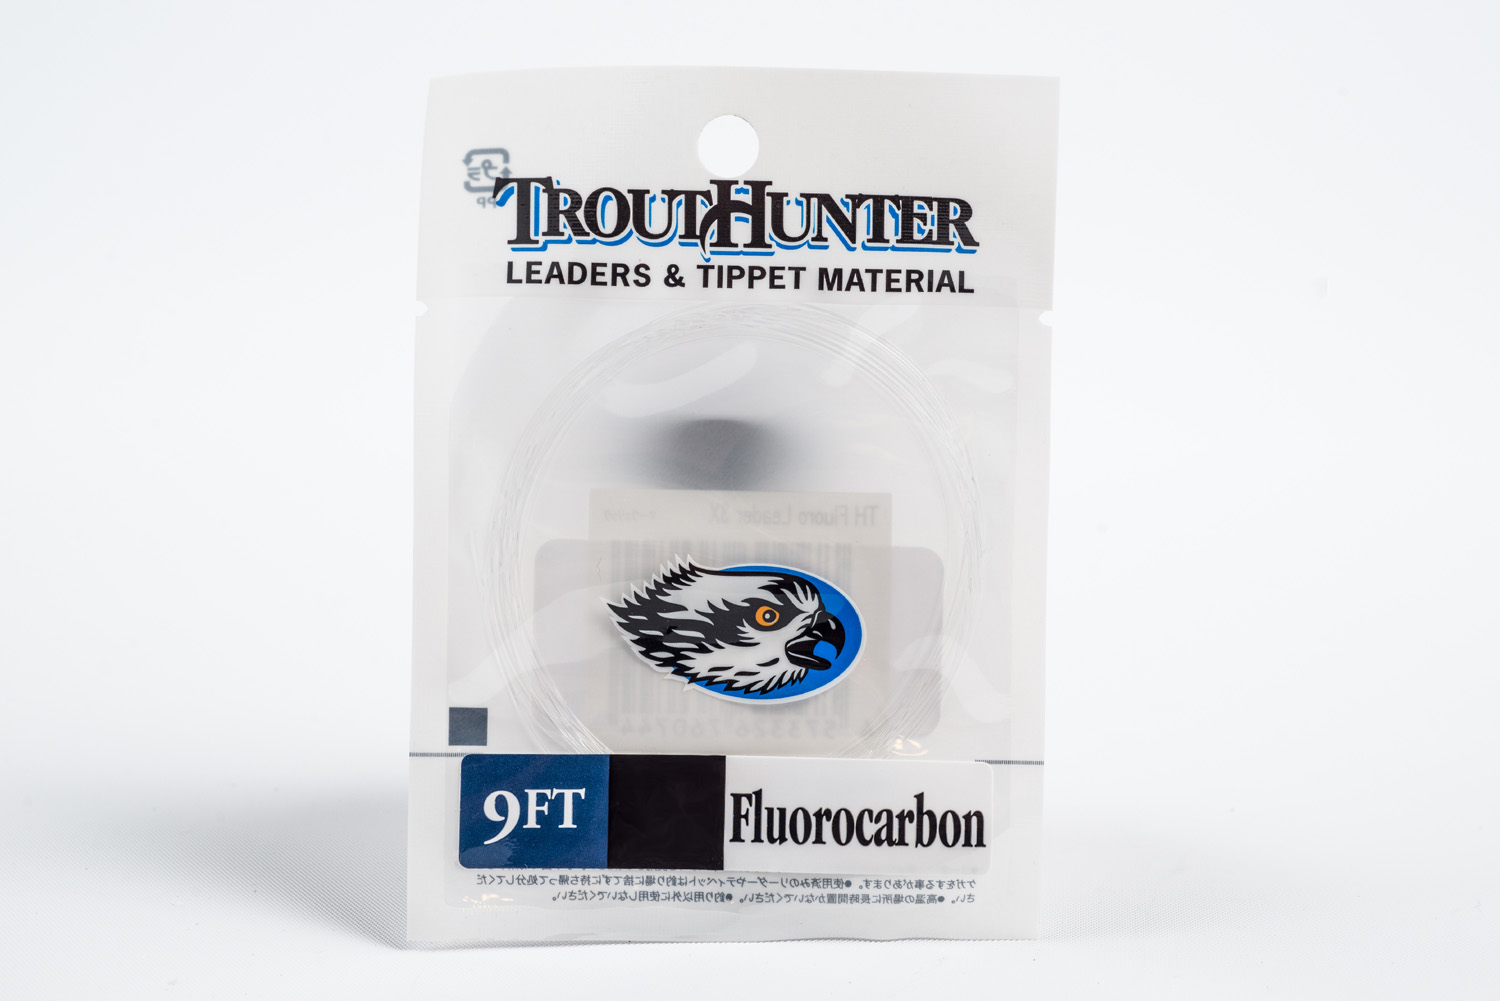 TroutHunter Fluorocarbon Leader 9ft 3 Pack 